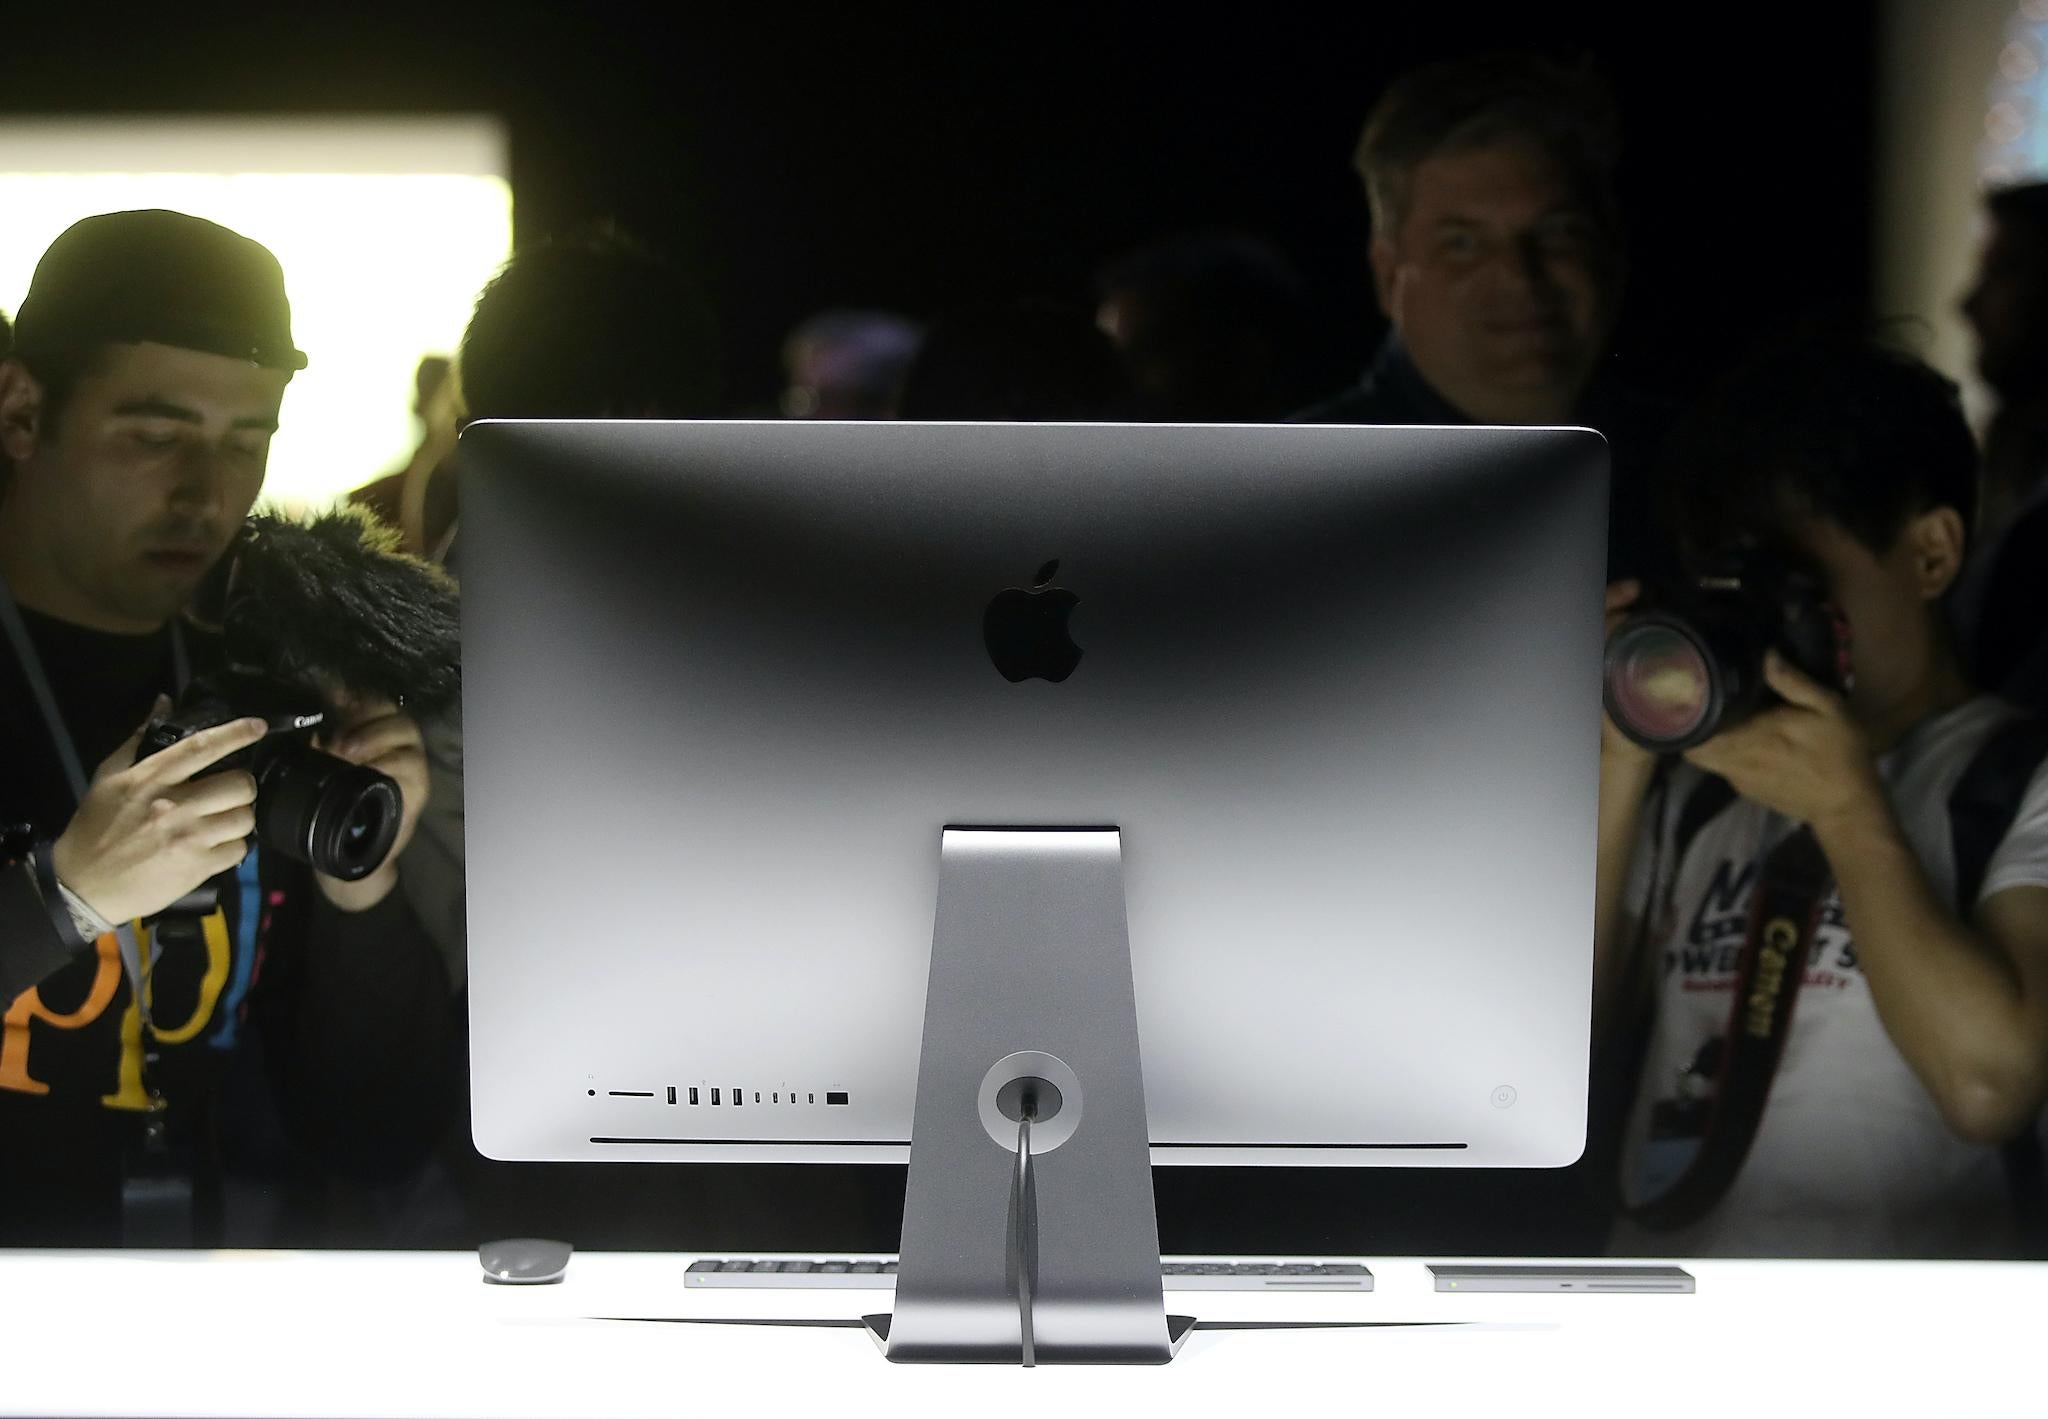 The new iMac Pro is displayed during the 2017 Apple Worldwide Developer Conference (WWDC) at the San Jose Convention Center on June 5, 2017 in San Jose, California